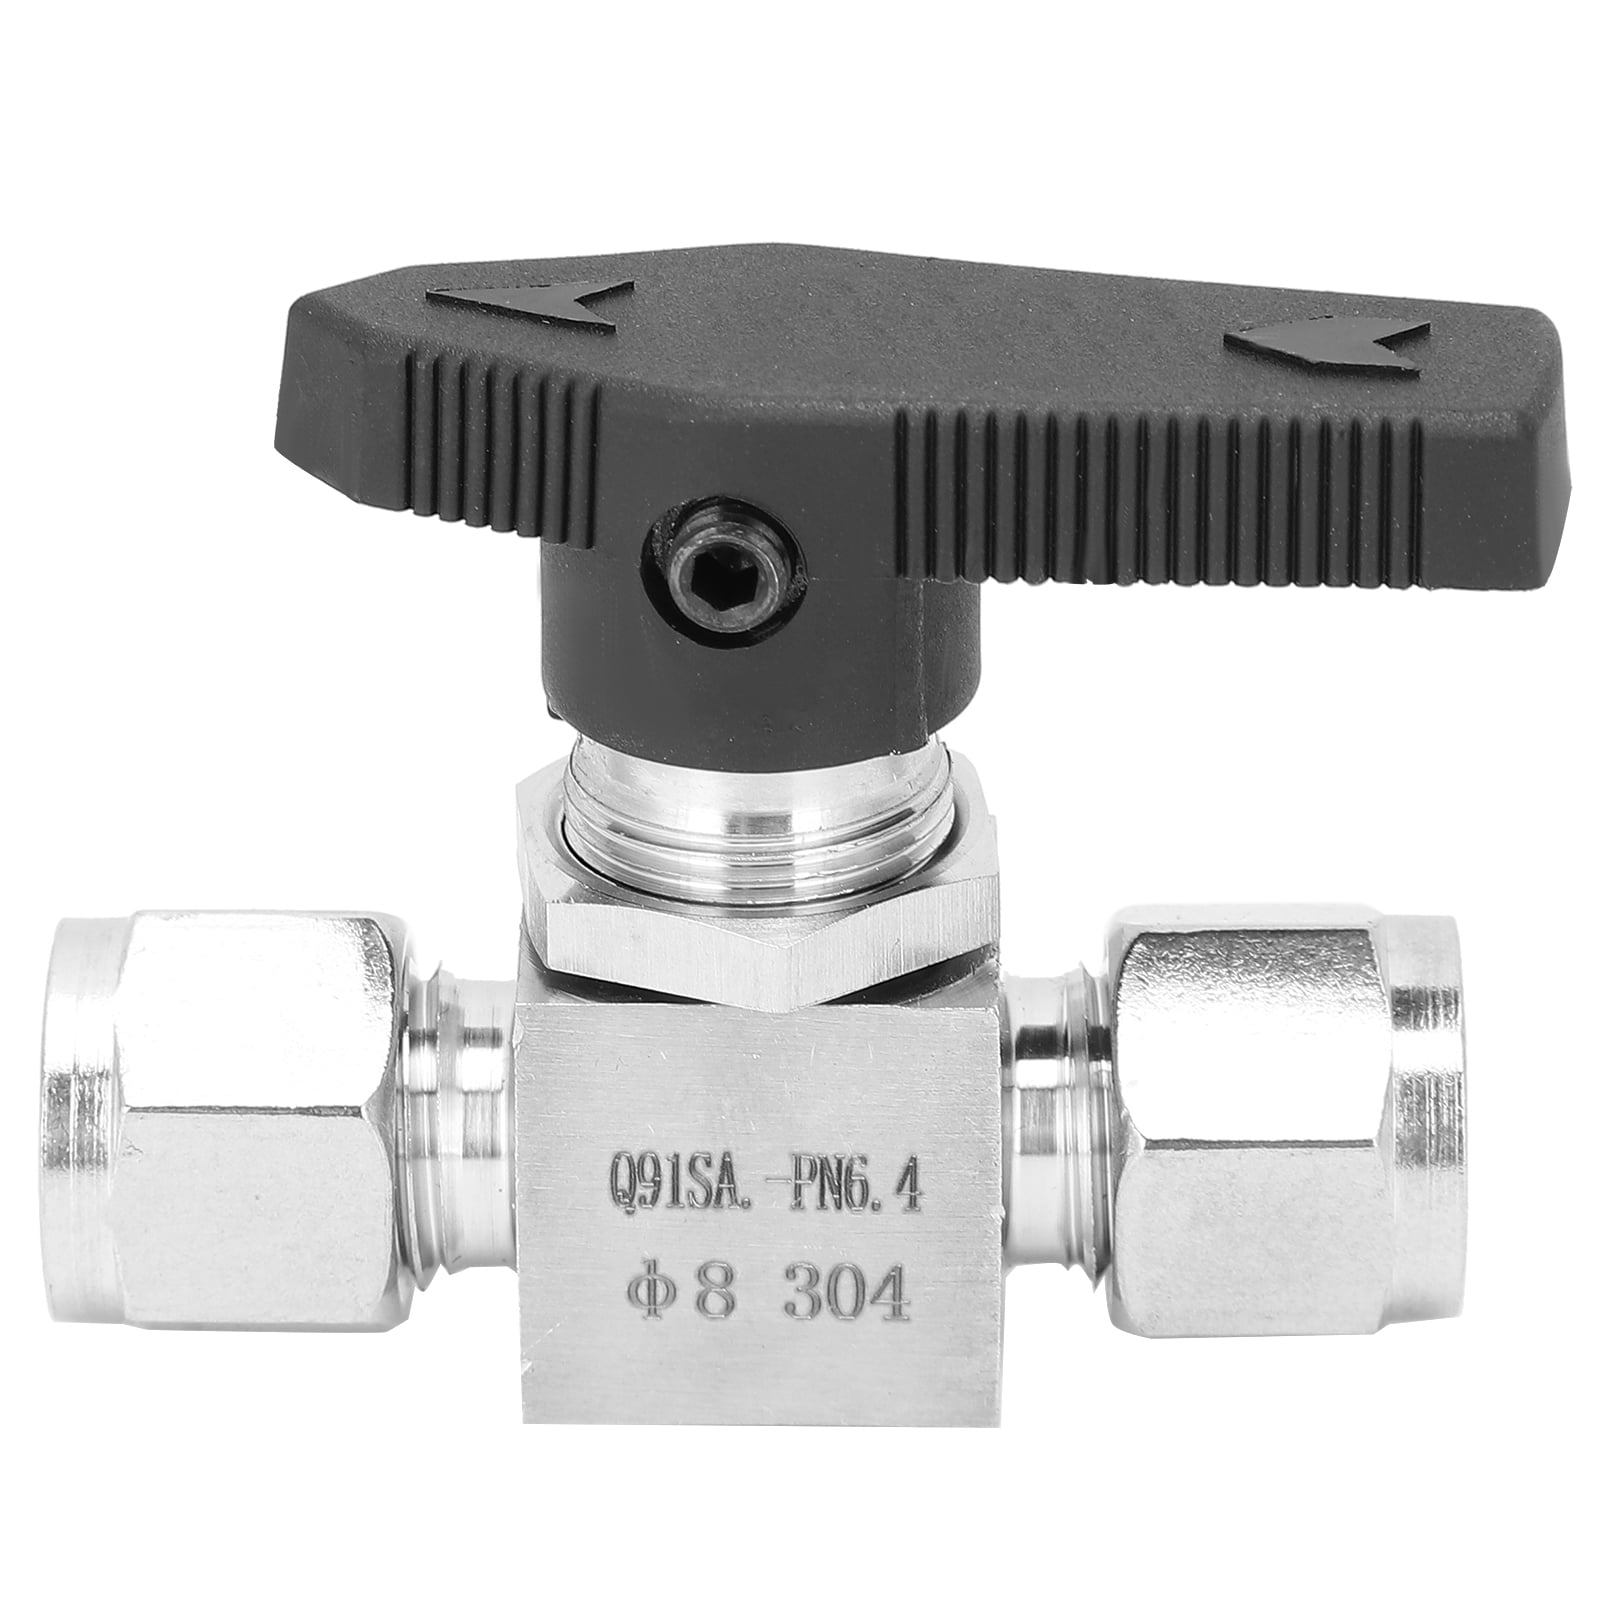 930Psi for Automobile And Shipbuilding Industry Water Gas Oil 304 Stainless Steel Valve Ф8 Smooth Delicate Tightness SS‑44S6 Needle Valve 